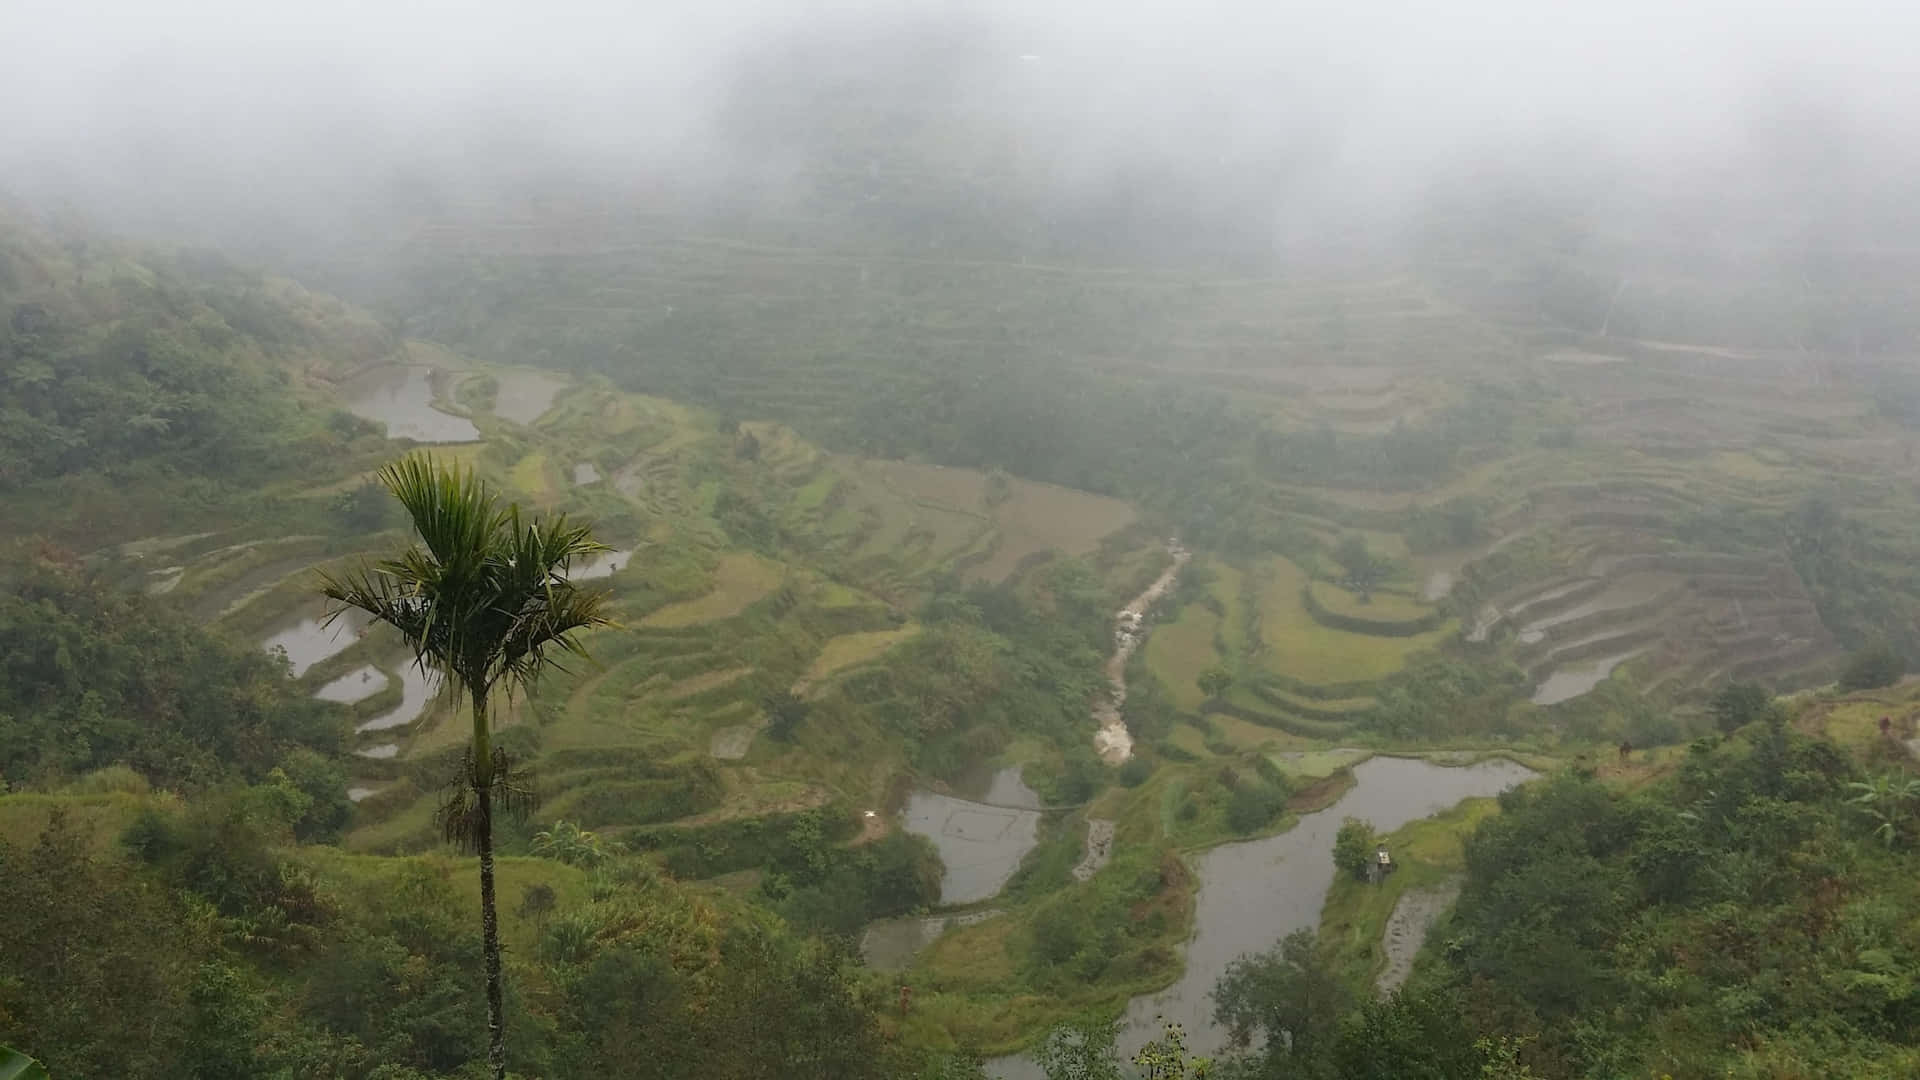 Foggy Banaue Rice Terraces In The Philippines Wallpaper